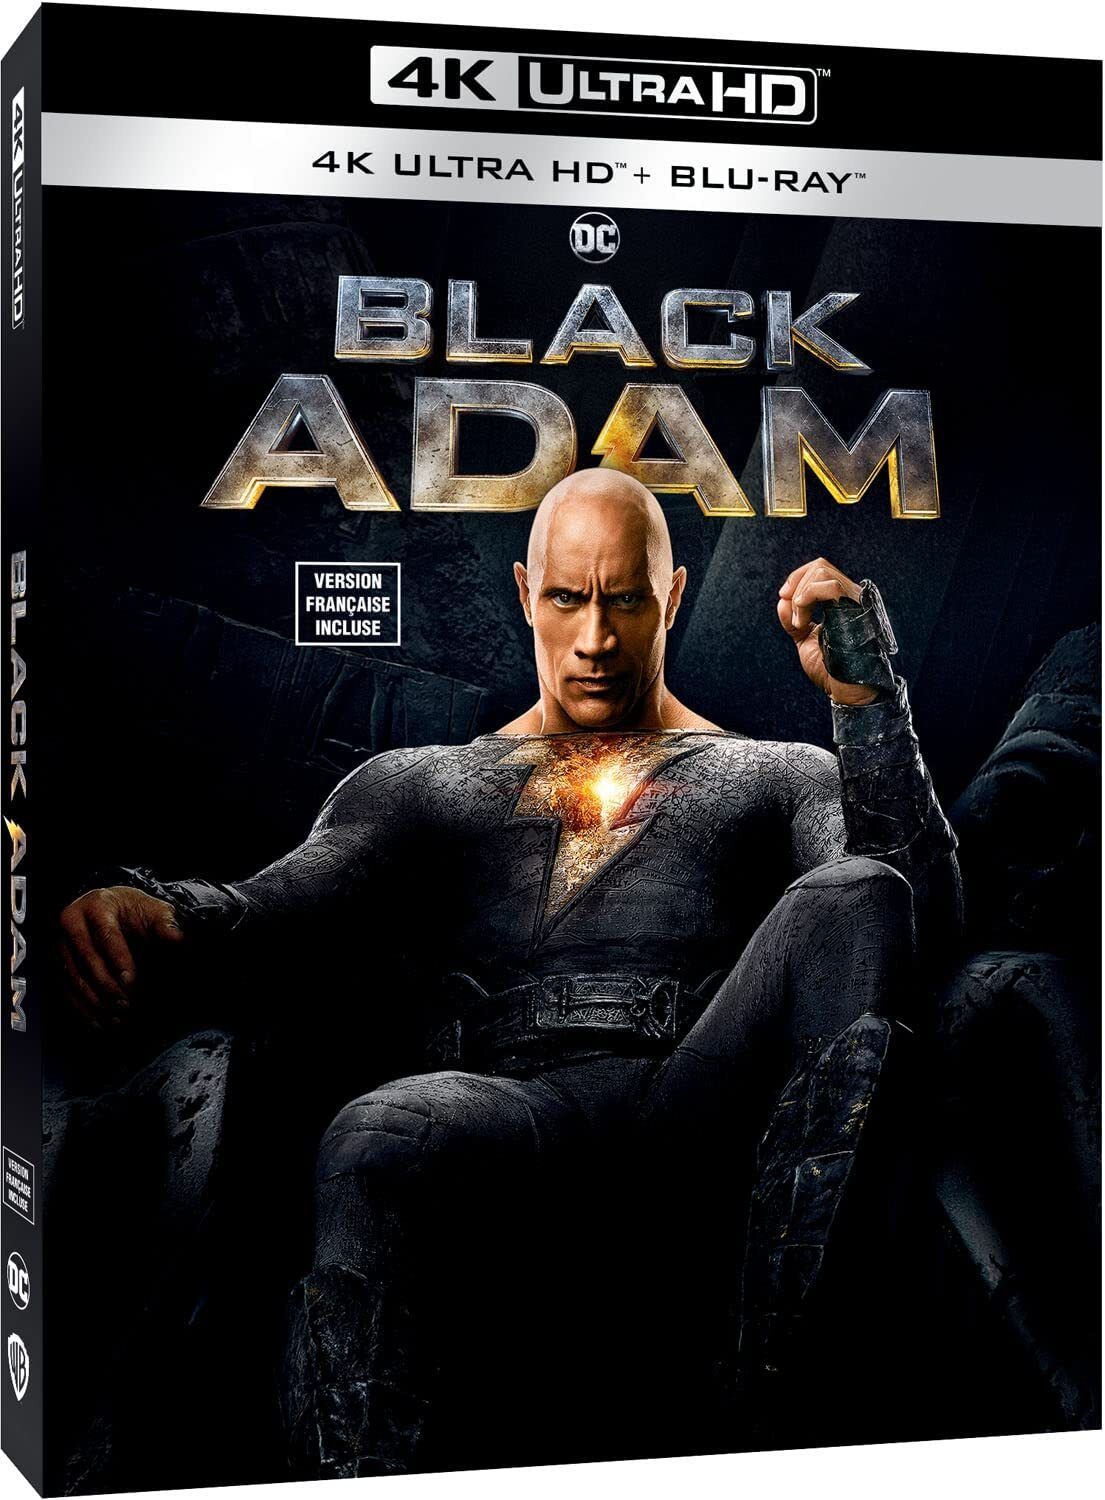 In a black costume, Dwayne Johnson sits on a black throne against a black background on the cover art for Warner's 4K edition of BLACK ADAM. Which comes in a black case.